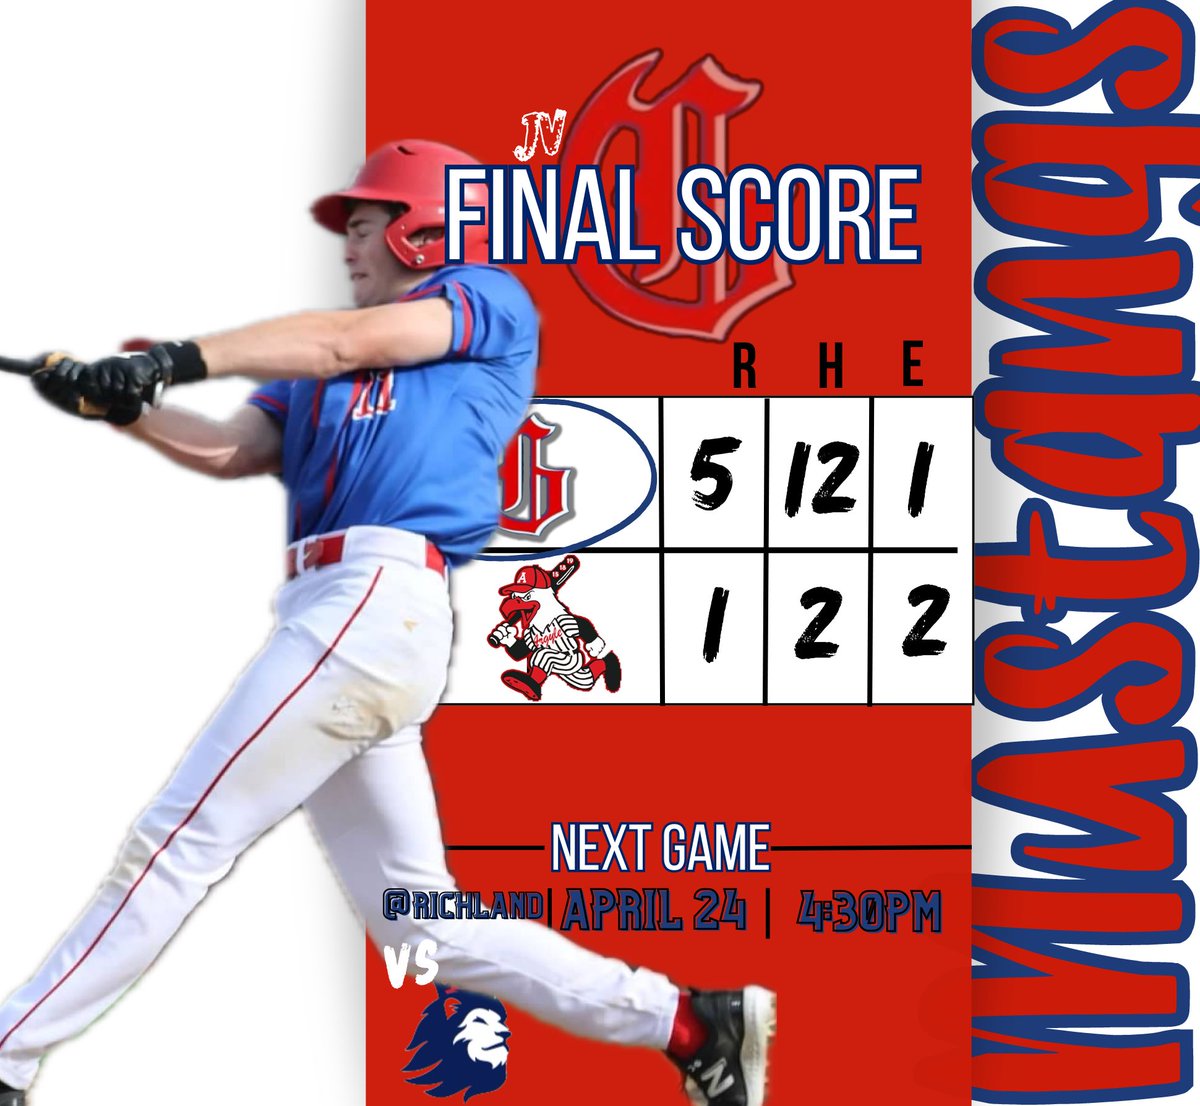 “Friday Night Lights” never shined brighter than last week in Argyle! Solid pitching and an onslaught of hitting proved too much. NEXT GAME Wednesday at Richland and FRIDAY at Home! Don’t Miss it!